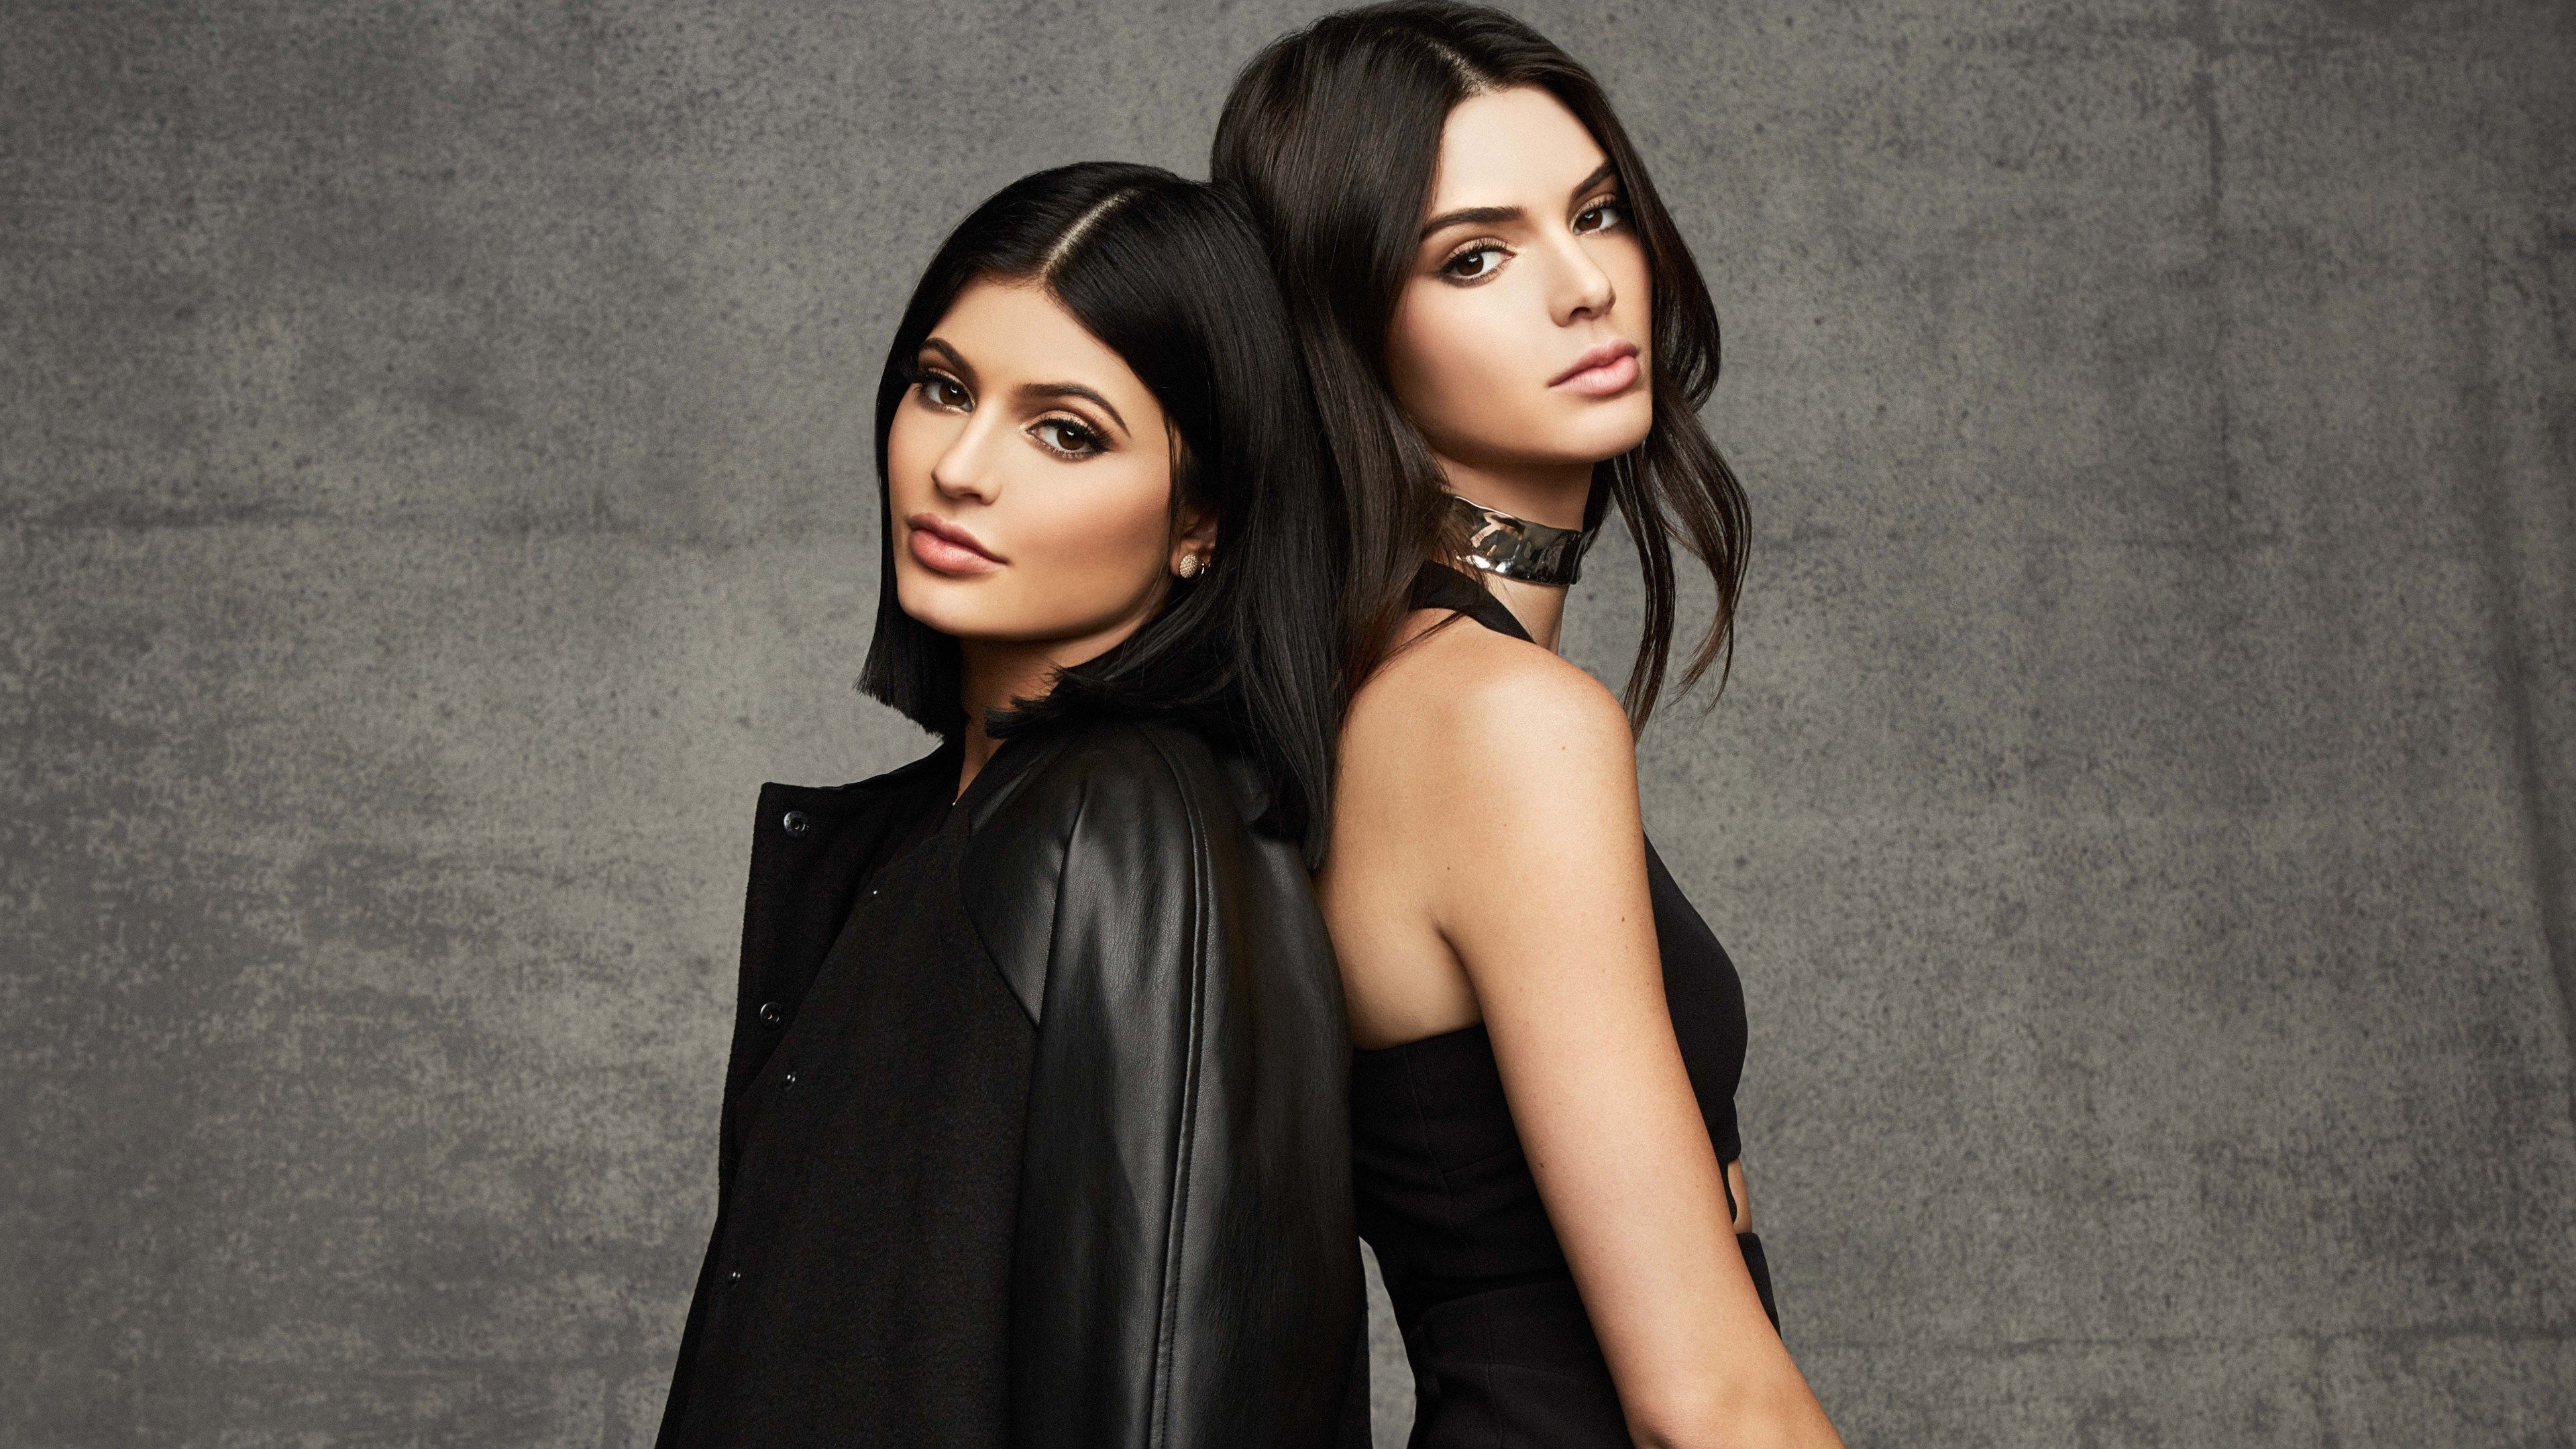 Kylie And Kendall Jenner 2017. Celebrities HD 4k Wallpaper